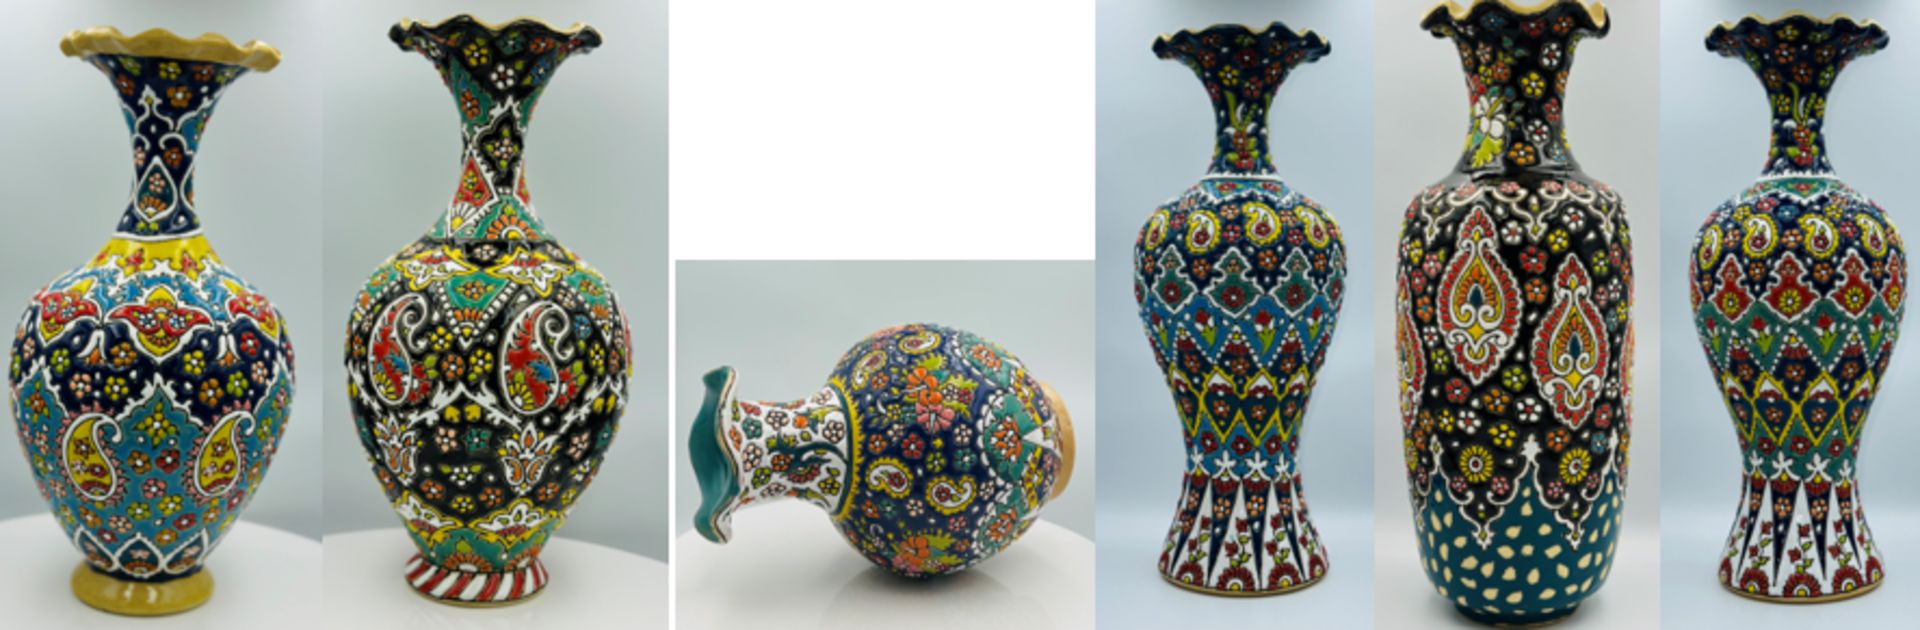 169 X HAND MADE VASES - ASSORTED SIZES AND DESIGNS - 23CM - 33CM - Image 2 of 2